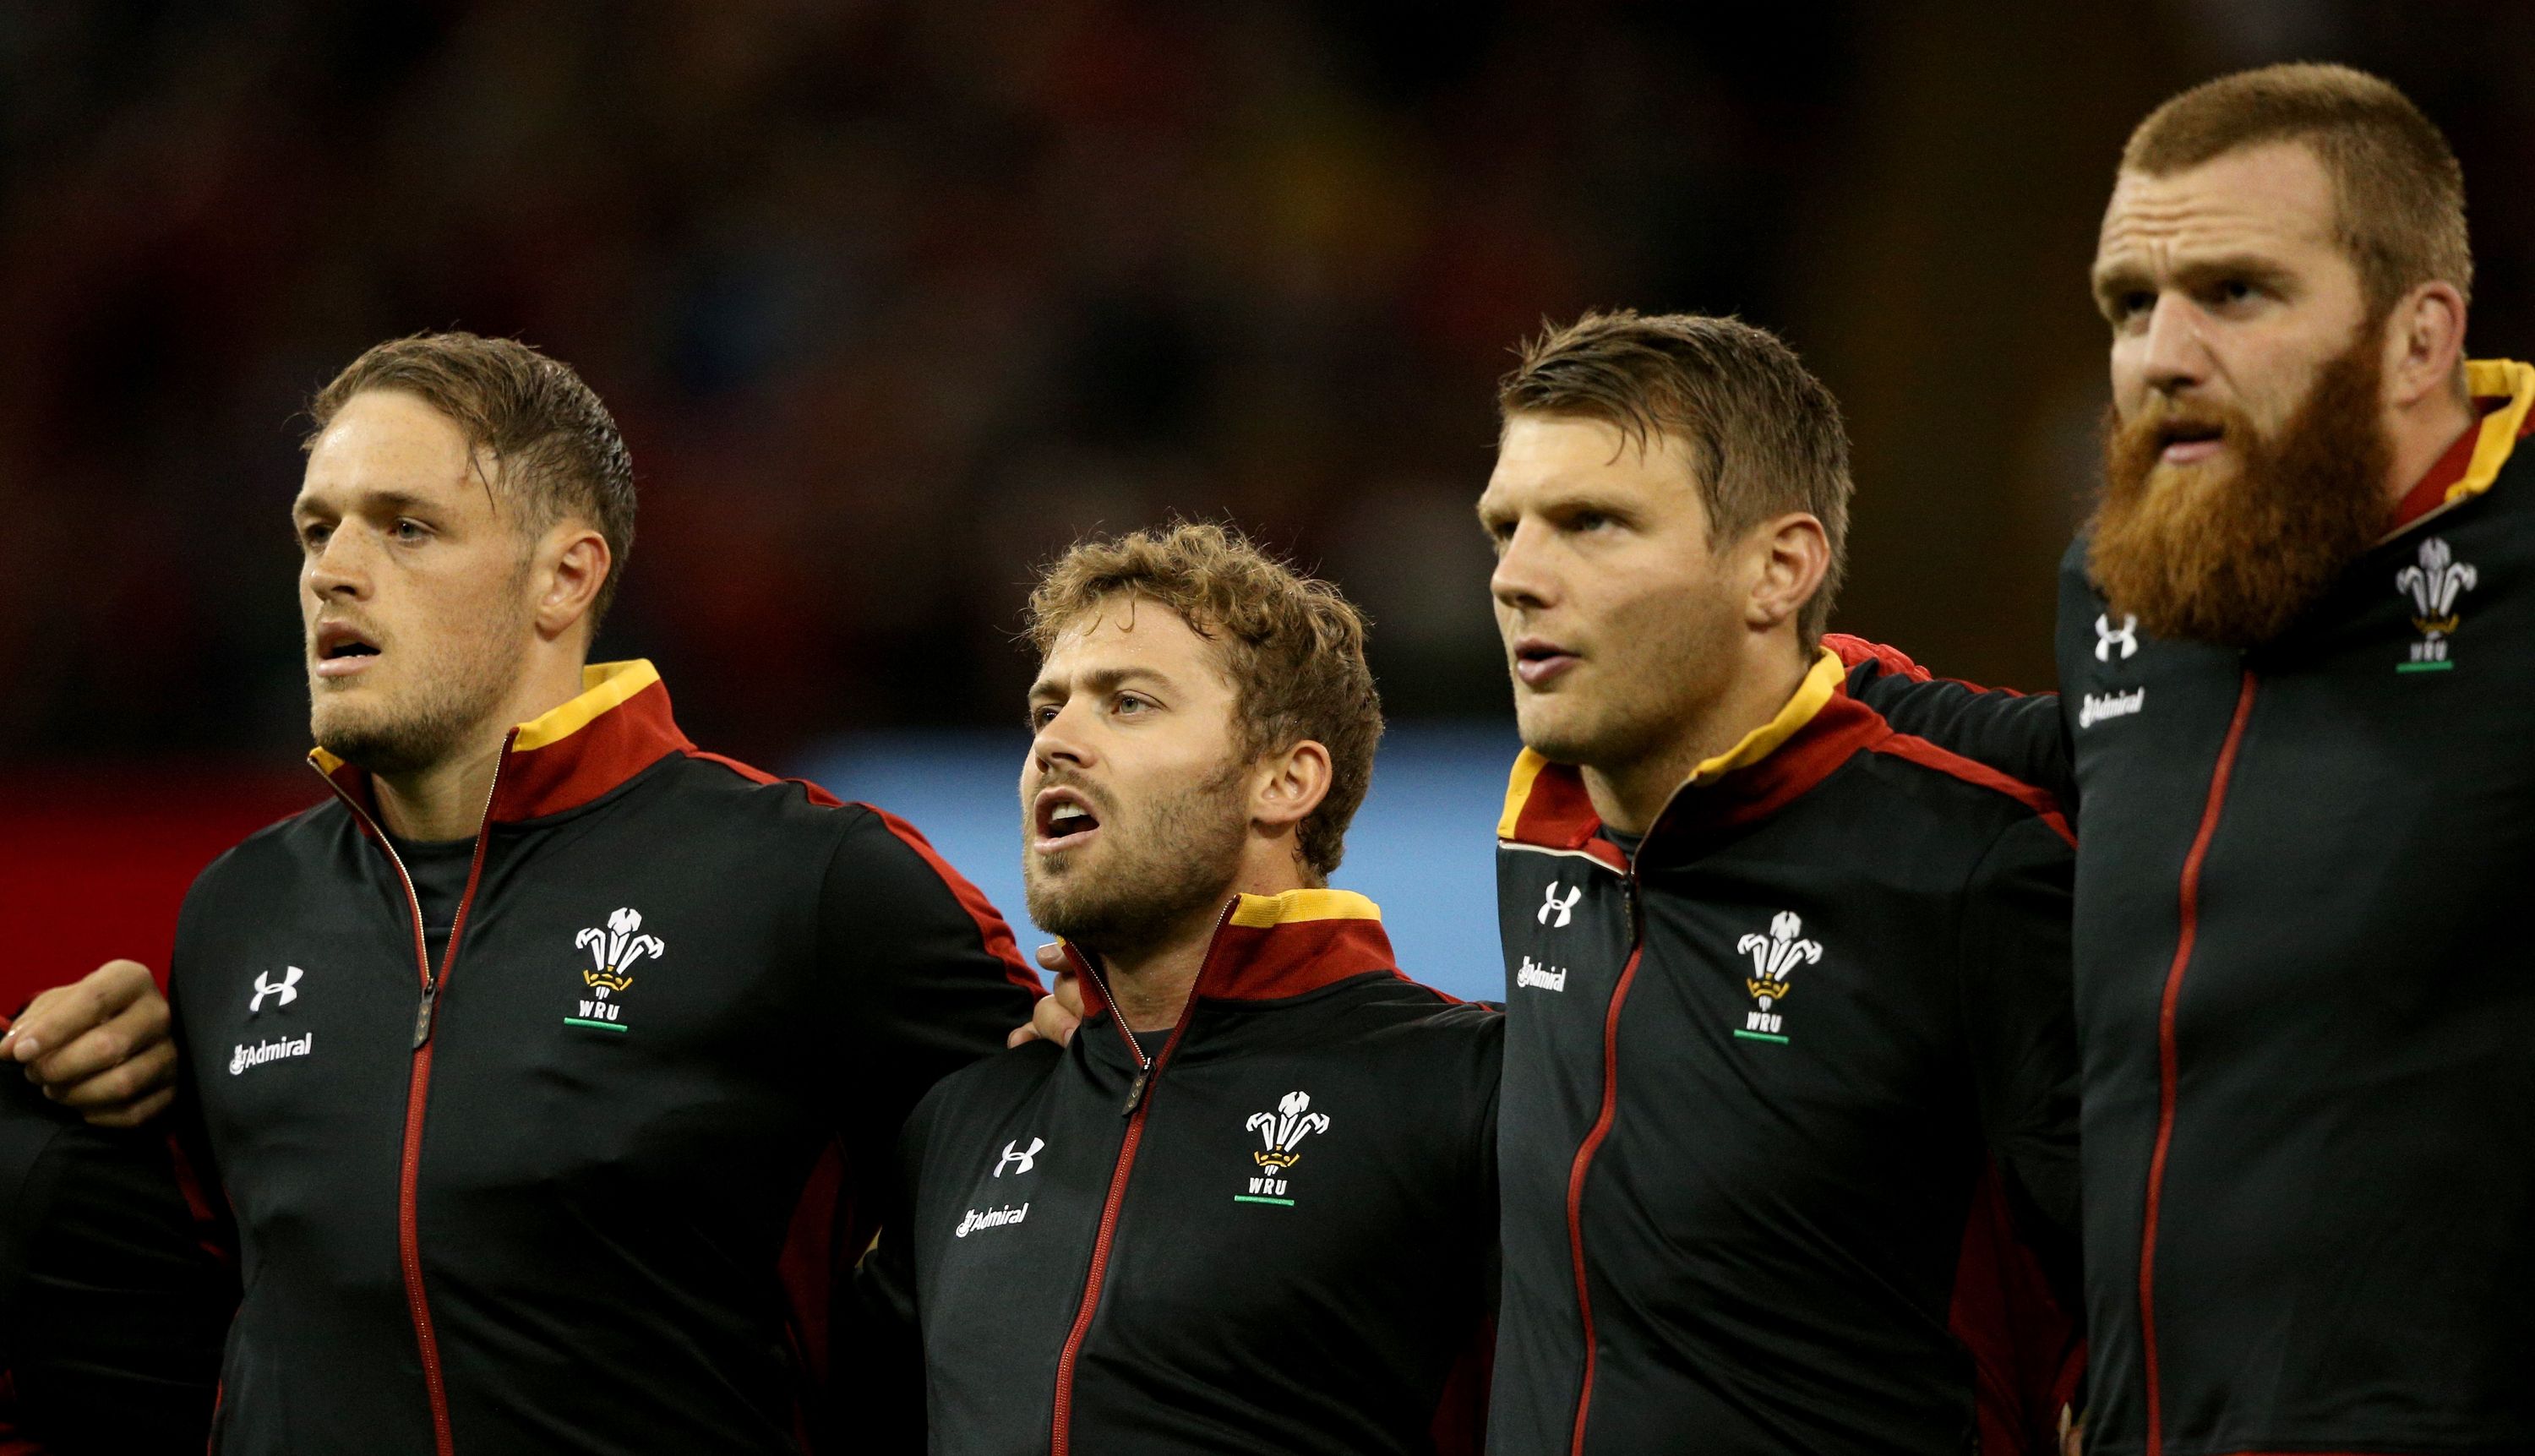 CARDIFF, WALES - SEPTEMBER 05:  Wales player Leigh Halfpenny (2nd left) sings the national anthem before the International match between Wales and Ireland at Millennium Stadium on September 5, 2015 in Cardiff, Wales.  (Photo by Stu Forster/Getty Images)